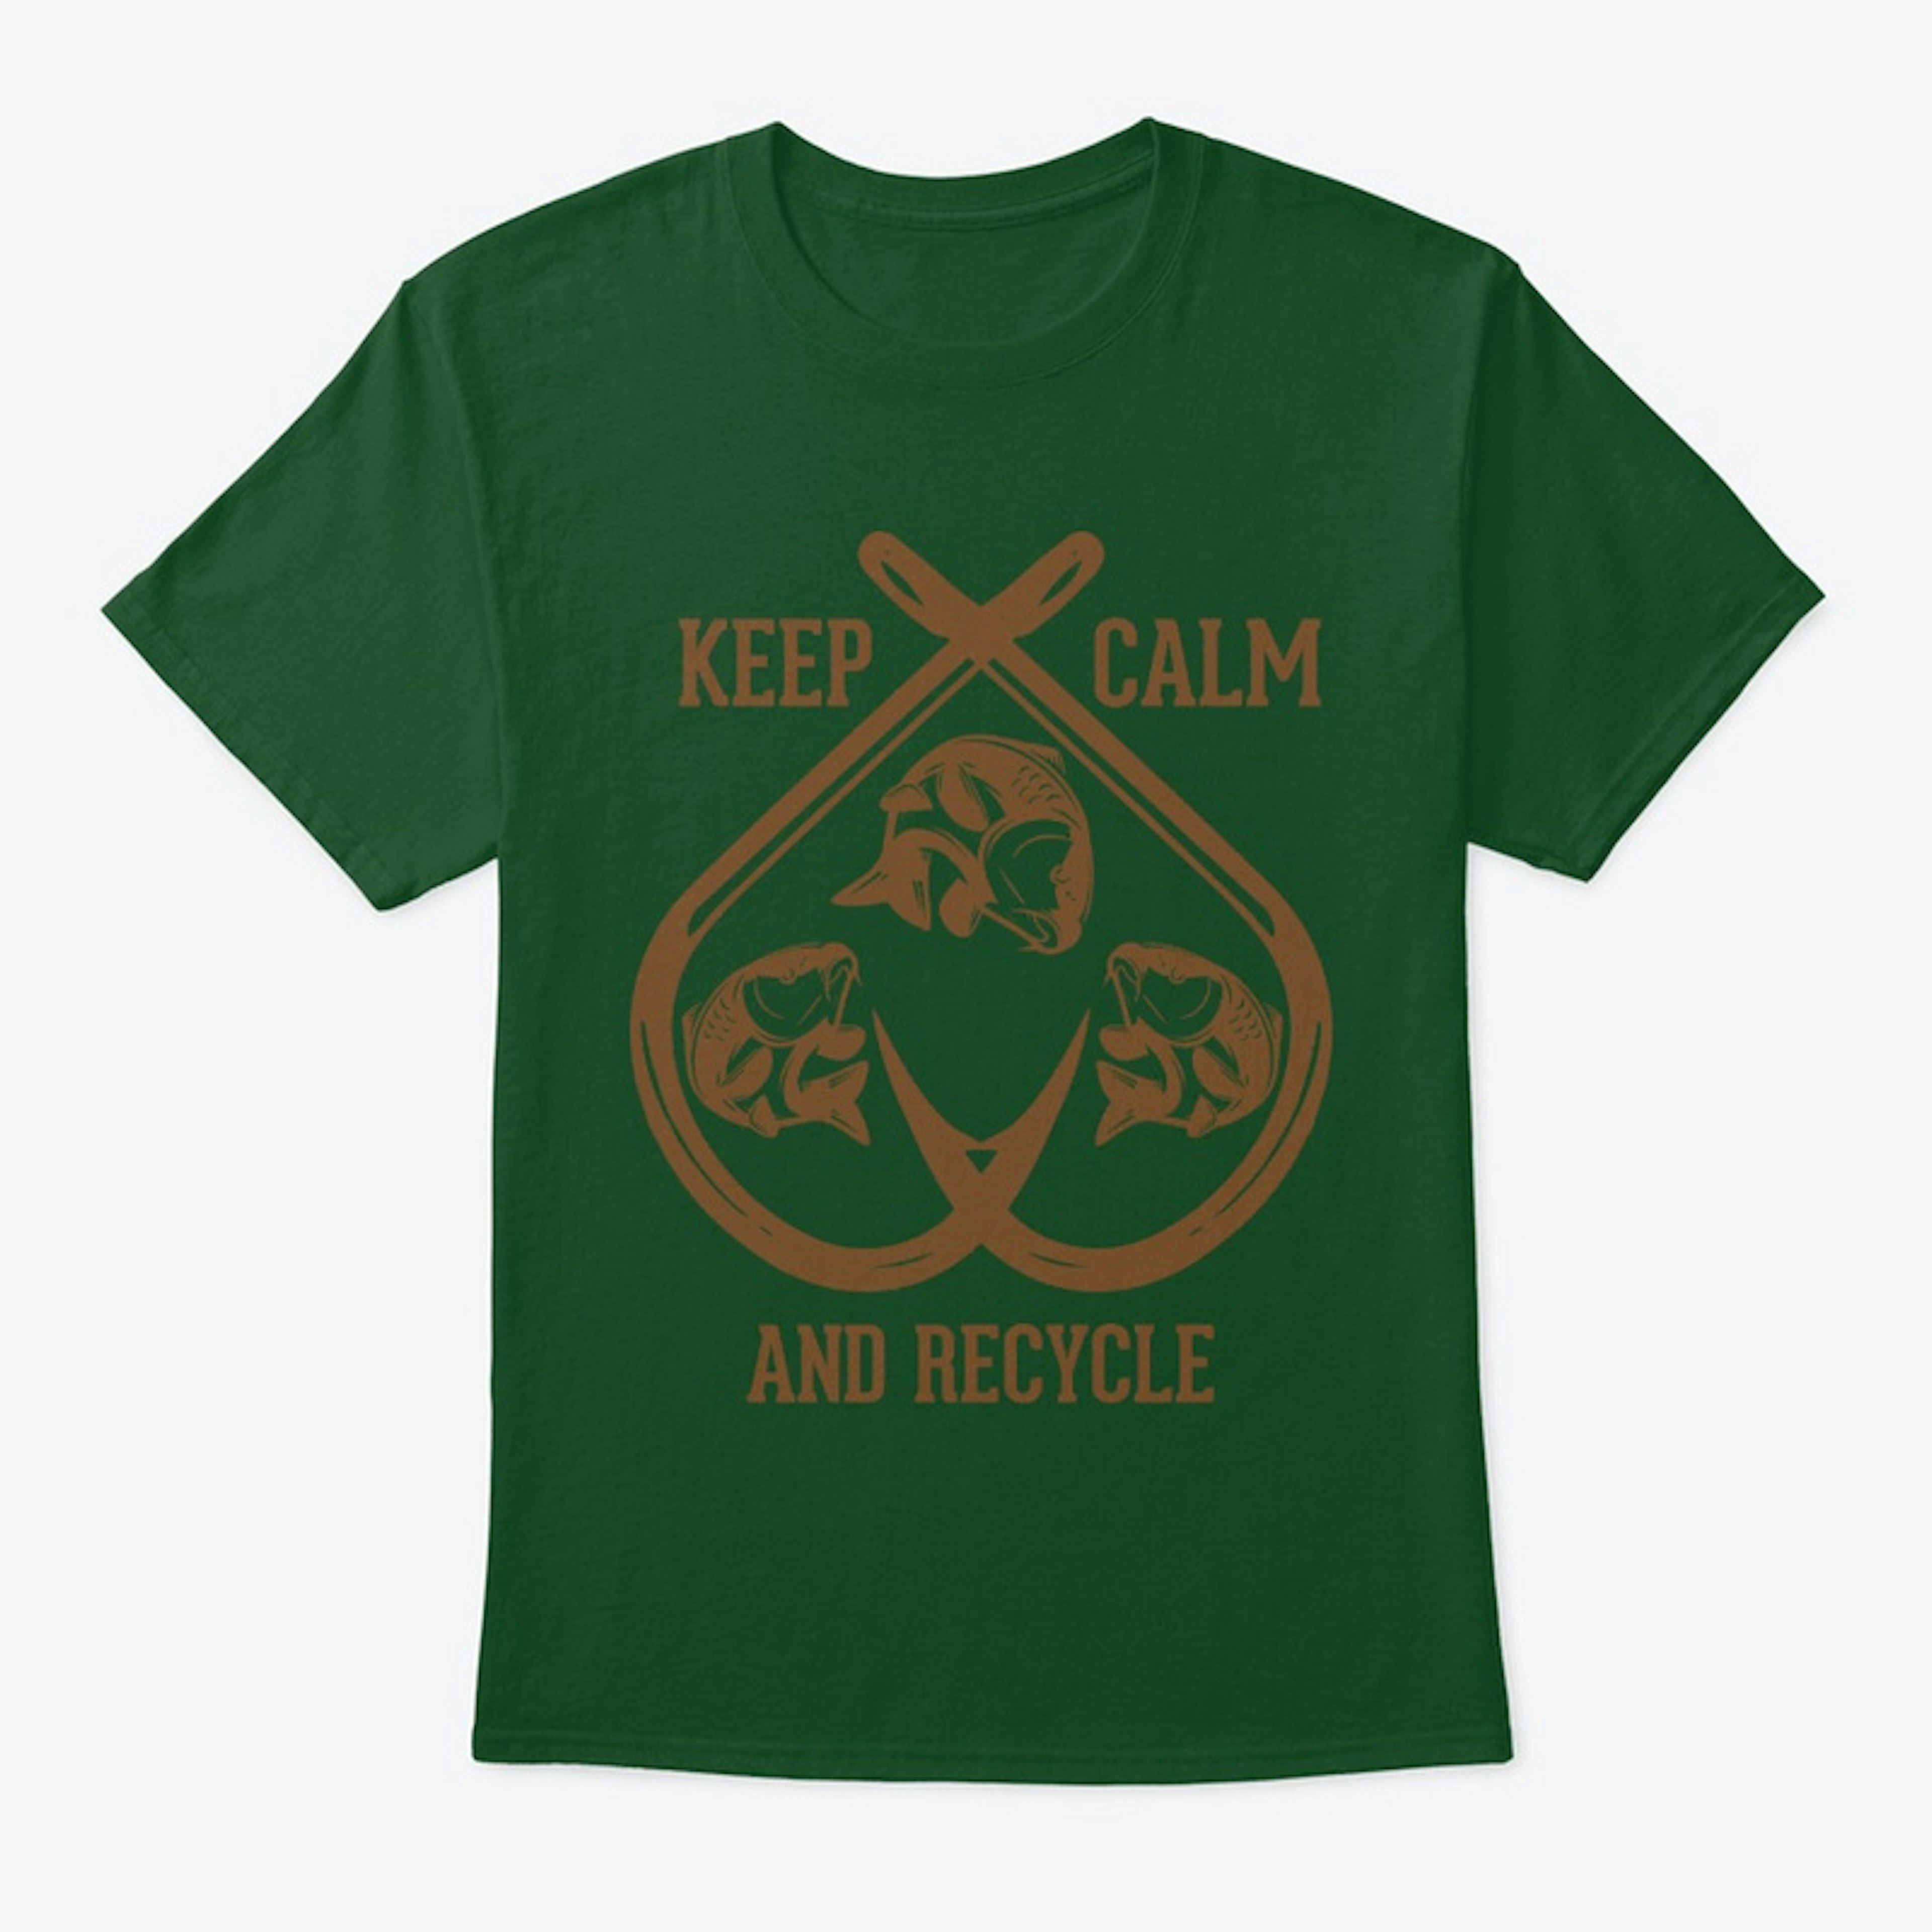 Fishing Shirt - KEEP CALM and RECYCLE